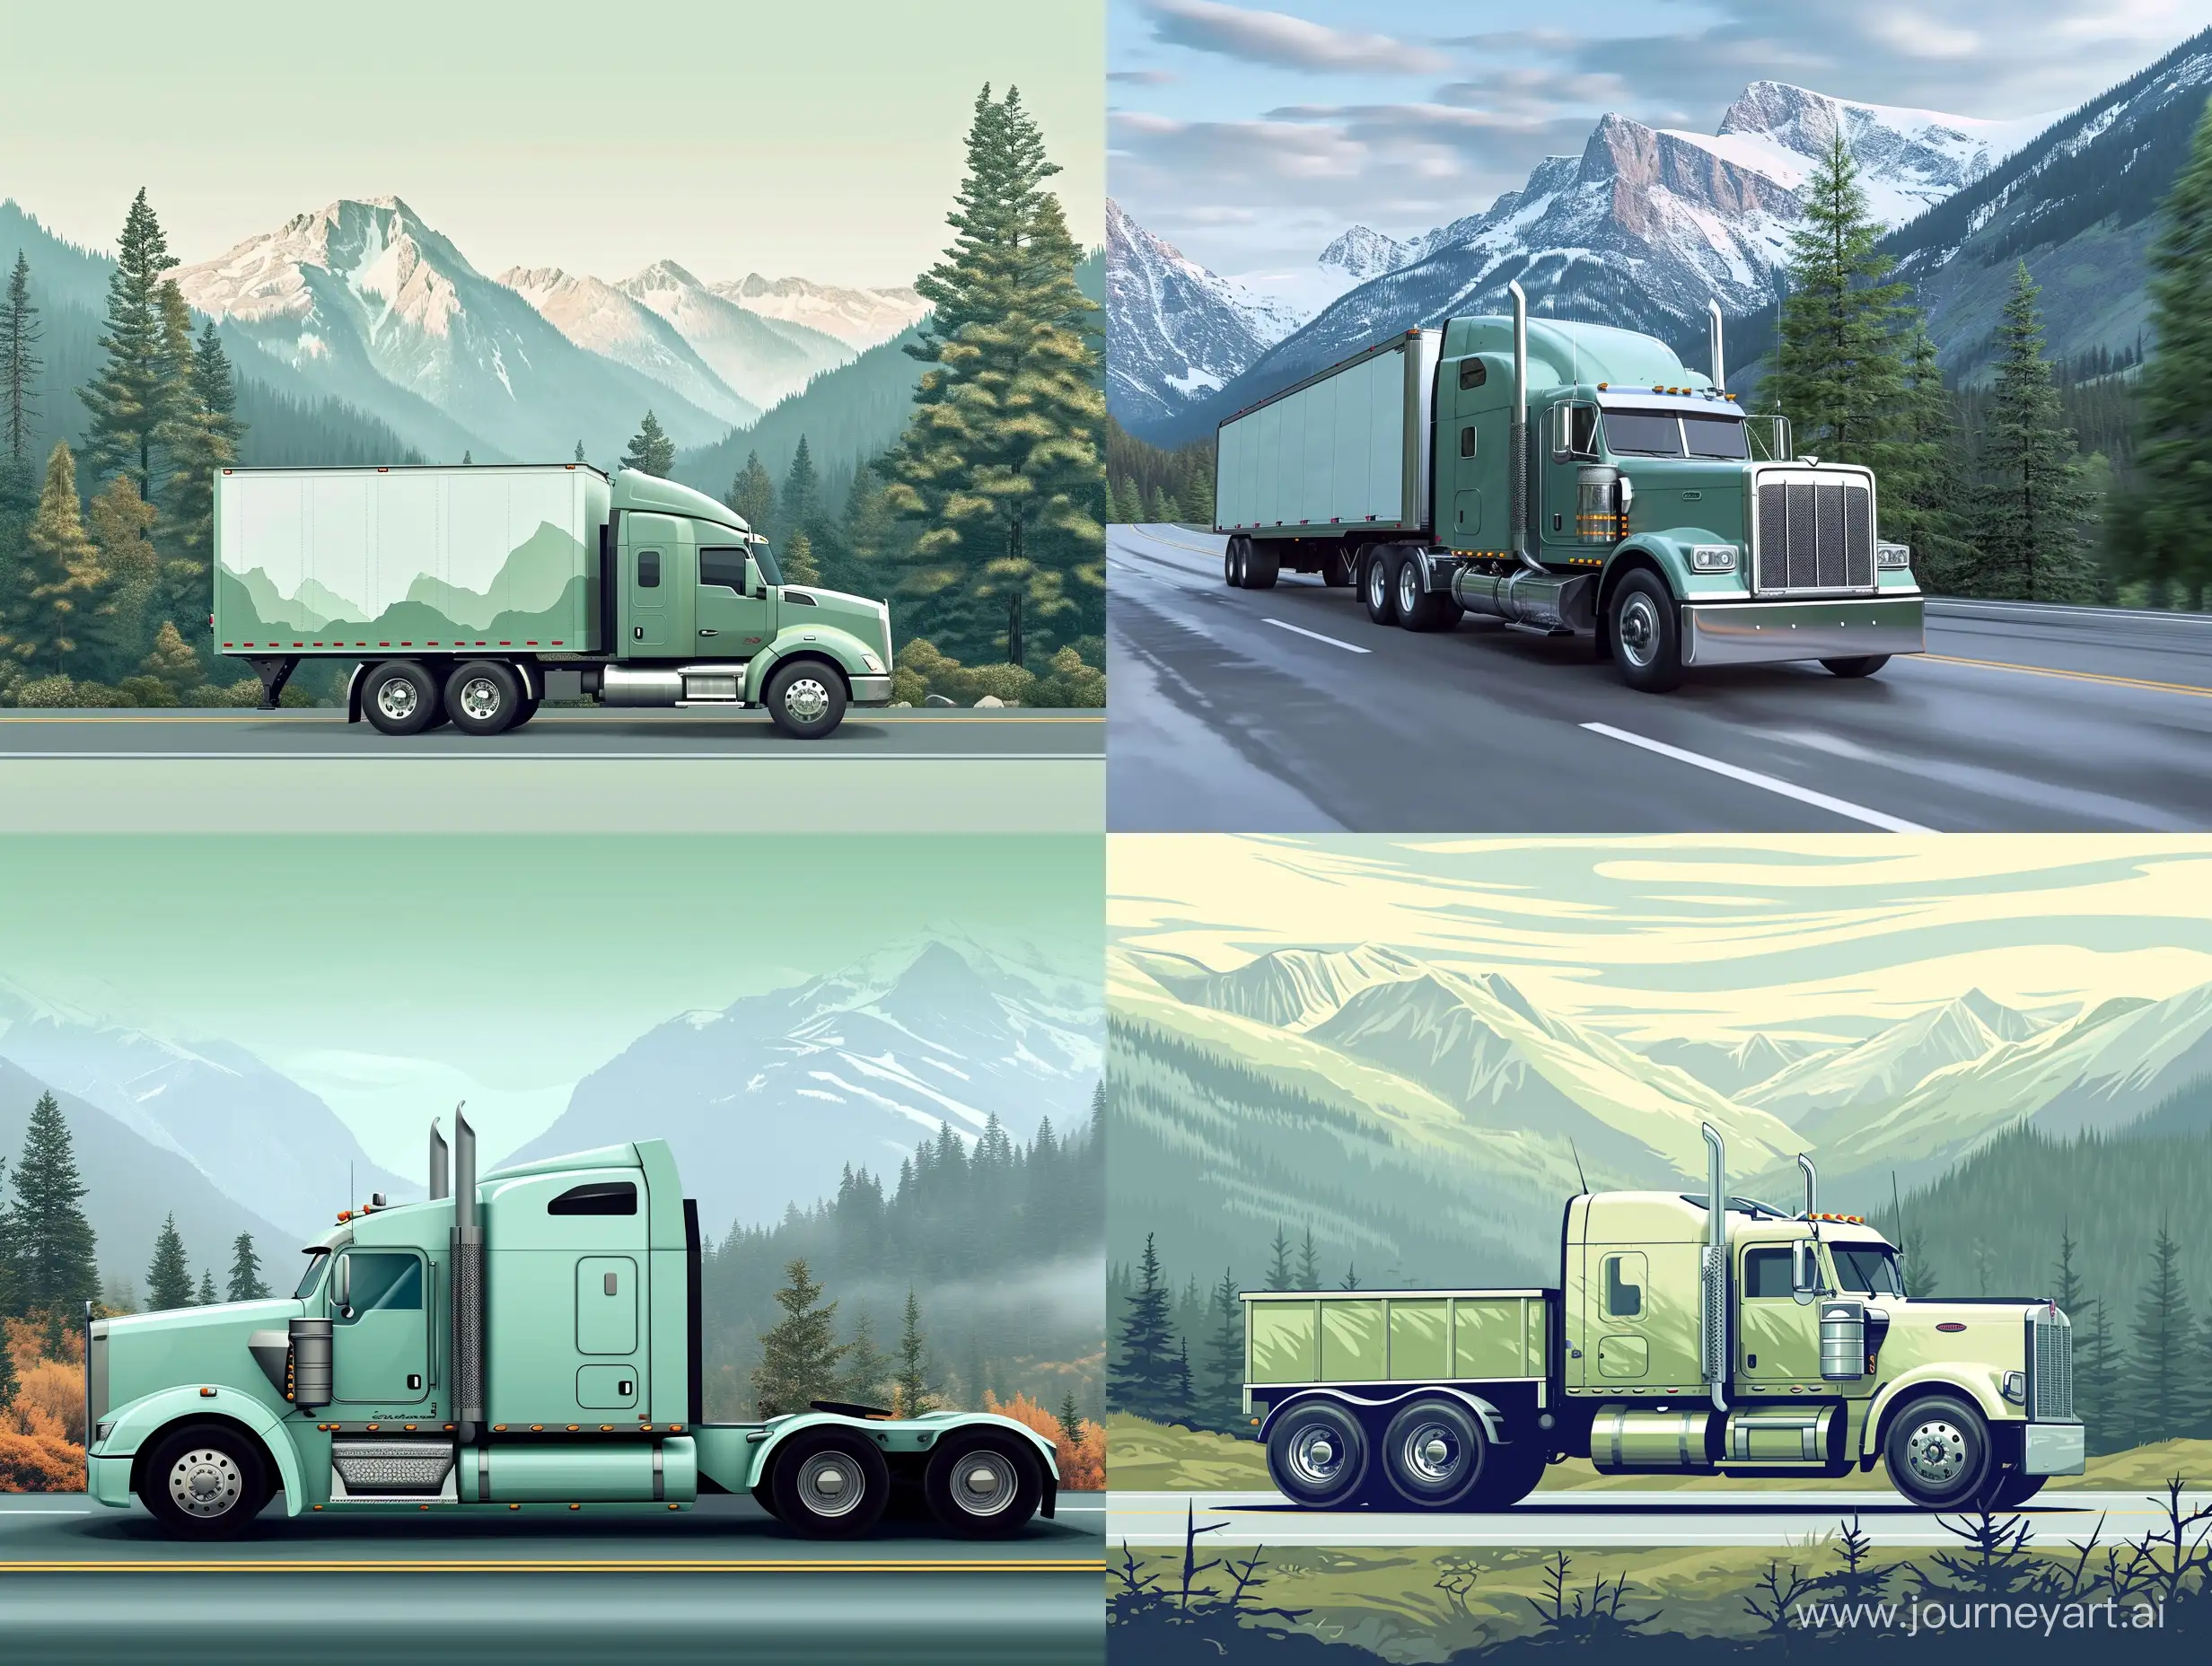 A realistically detailed American truck with a light green color to be in motion and have the truck to be on the road and around to be mountains and forest